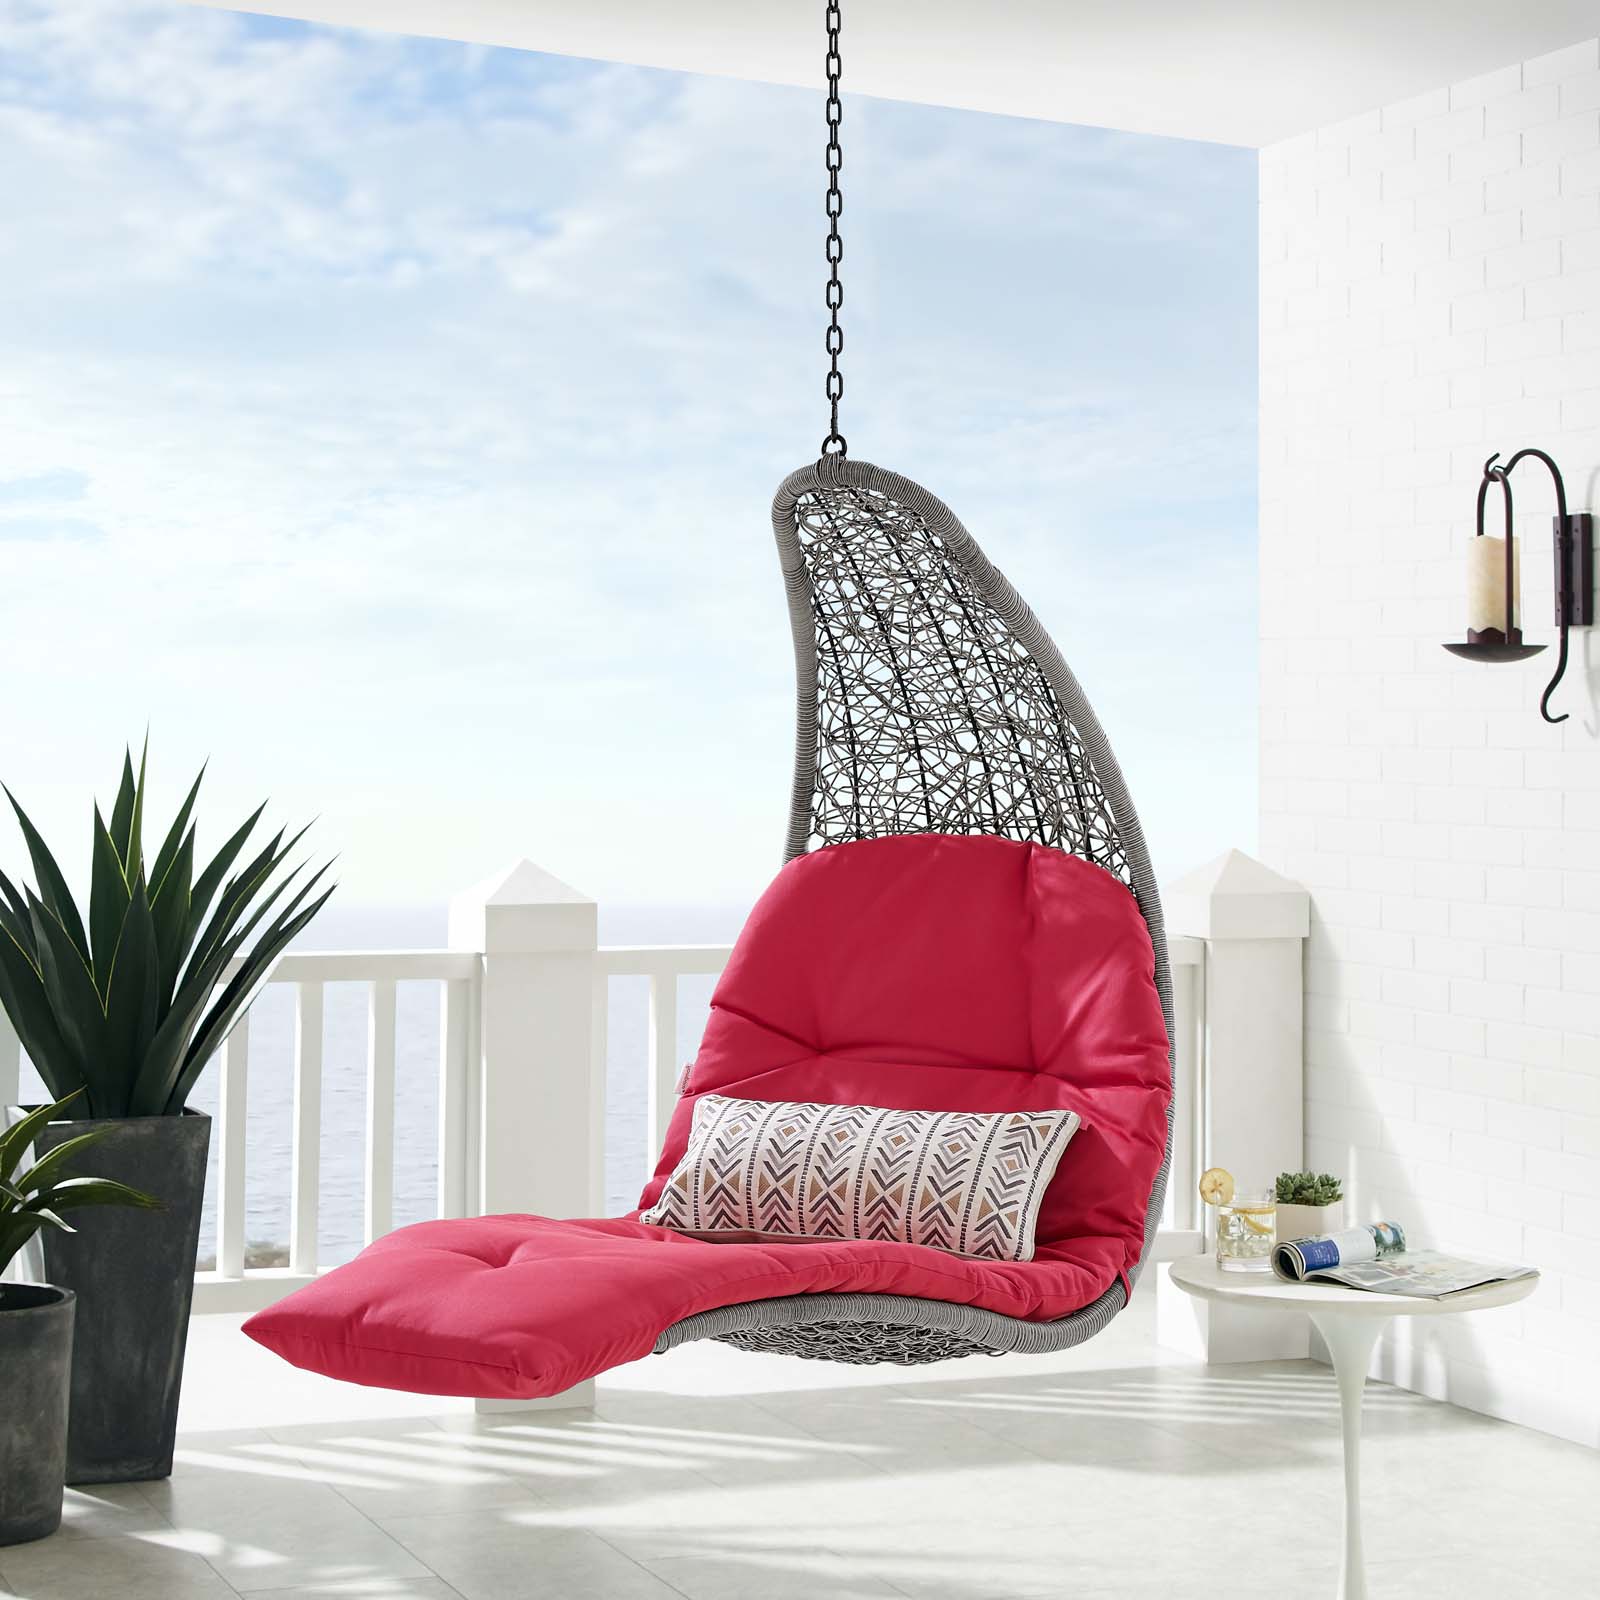 Swing Lounge Chair, Light Grey Gray Red, Modern Contemporary Urban Design, Outdoor Patio Balcony Cafe Bistro Garden Furniture Hotel Hospitality - image 2 of 6